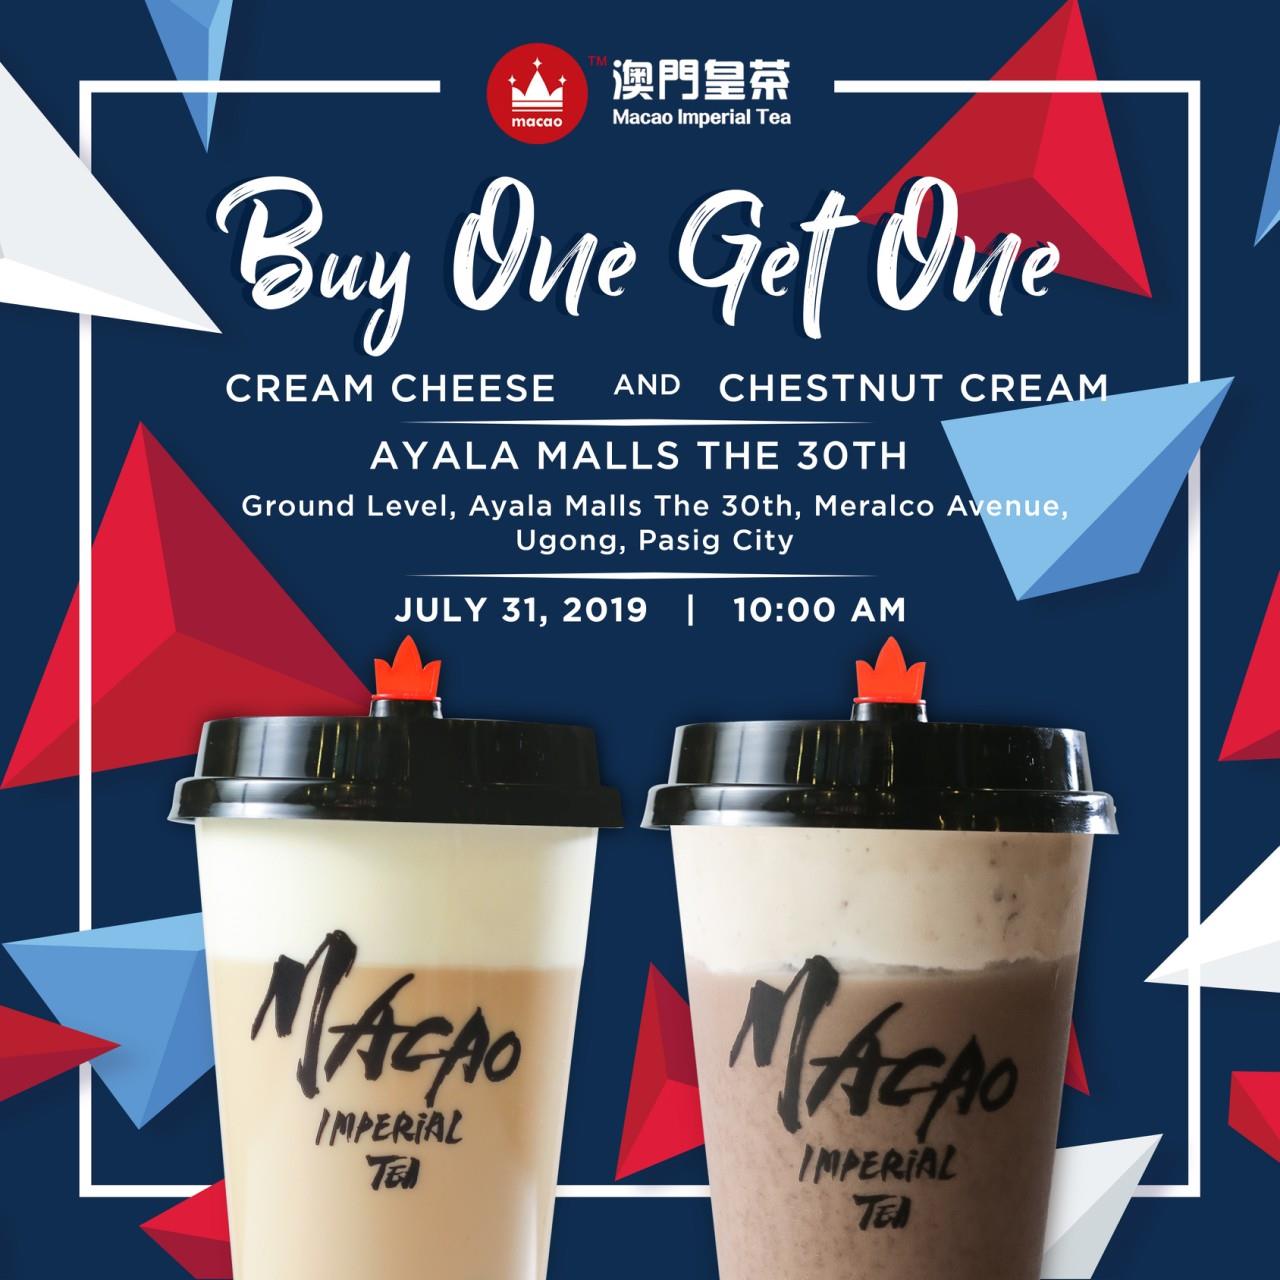 Macao Imperial Tea - Ayala Malls the 30th Buy 1 Get 1 Free